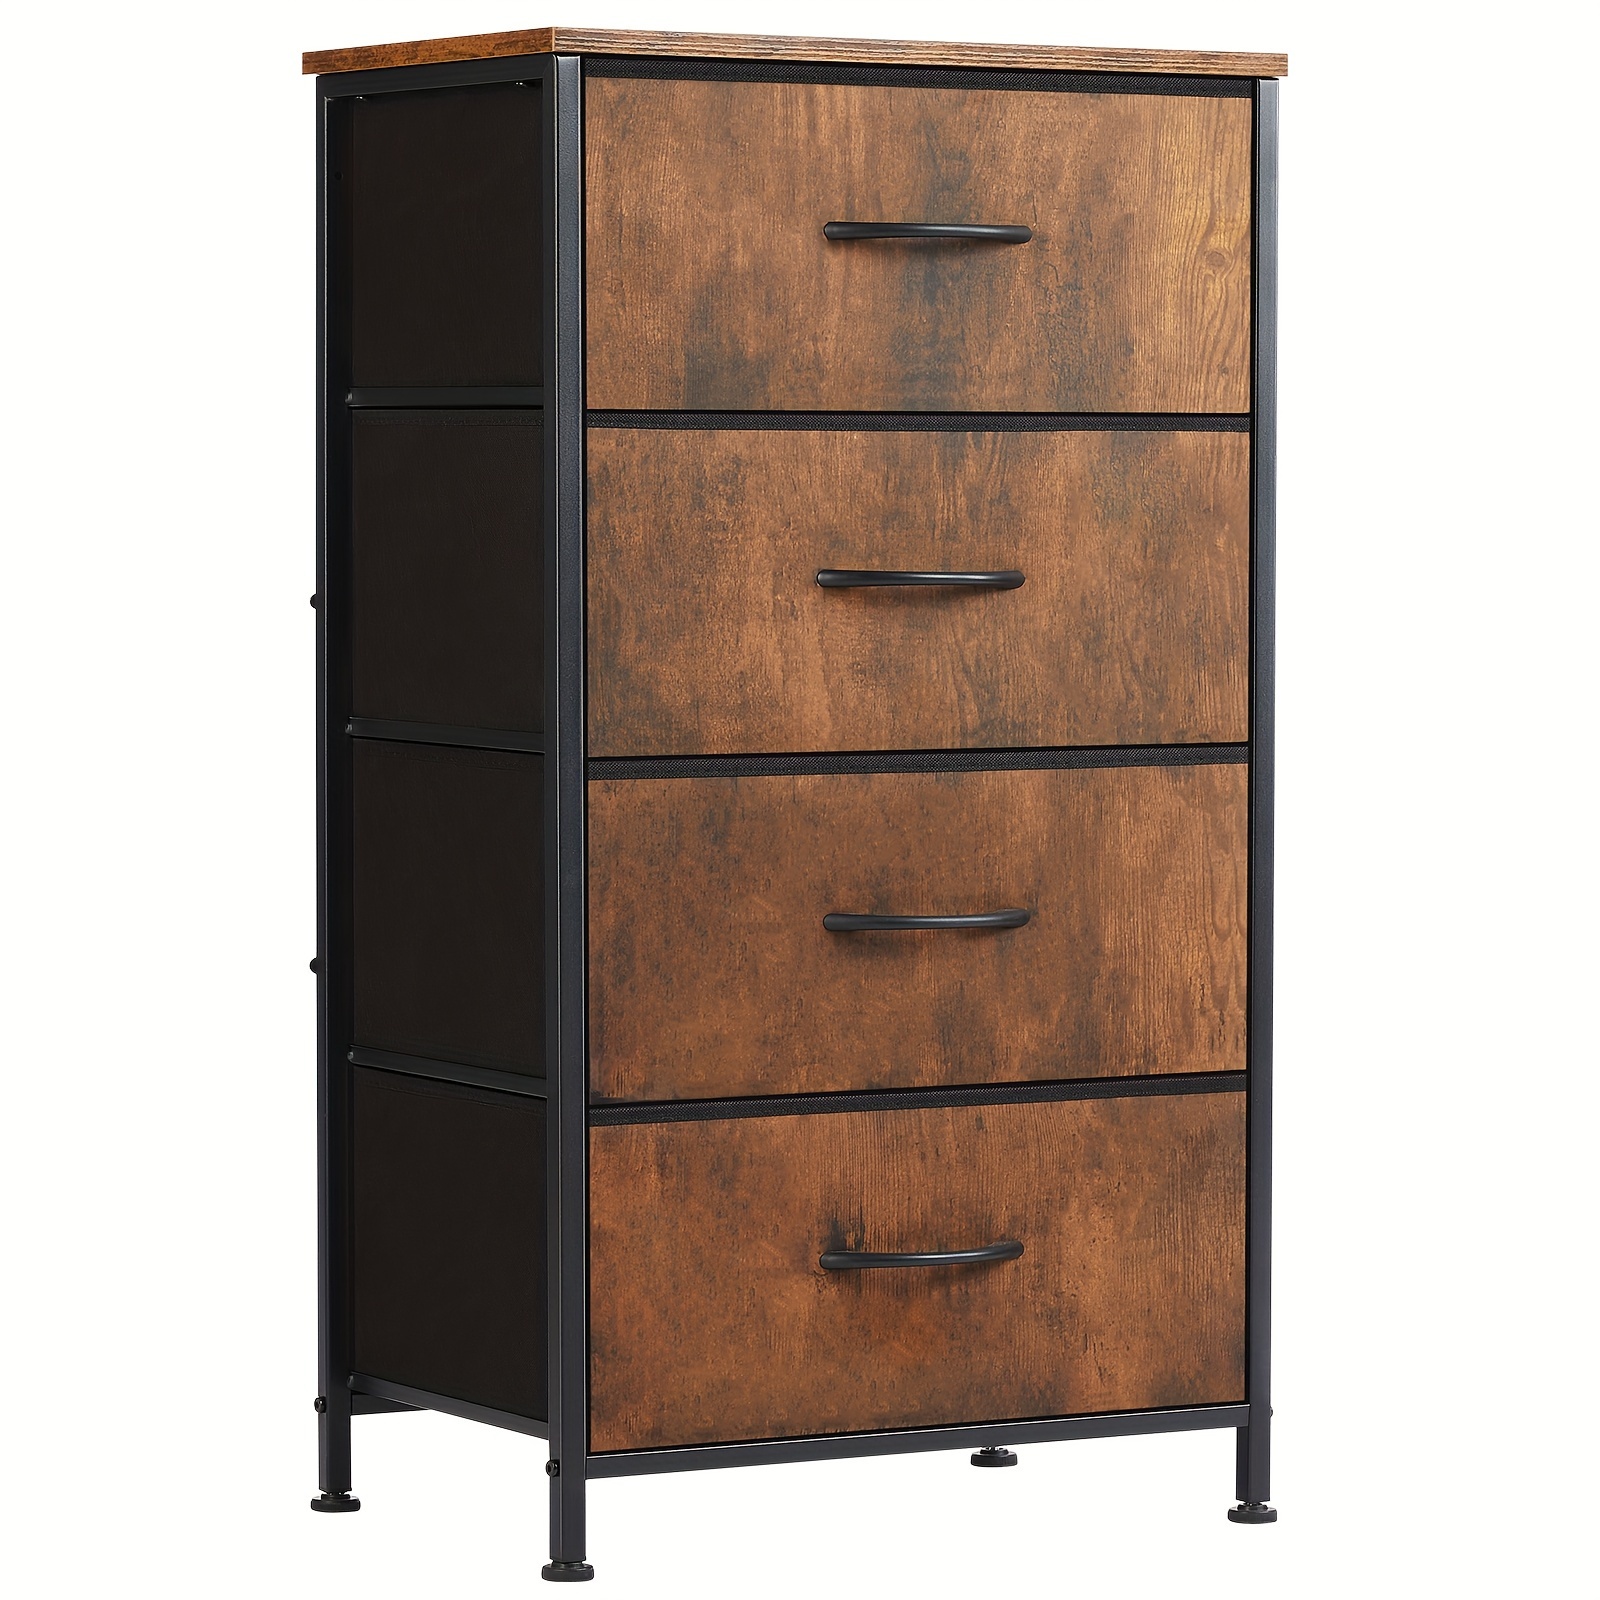 

4 Drawer Dresser Organizer Storage Drawers, Chest Of Drawers With Fabric Bin, Steel Frame, Wood Top For Bedroom, Closet